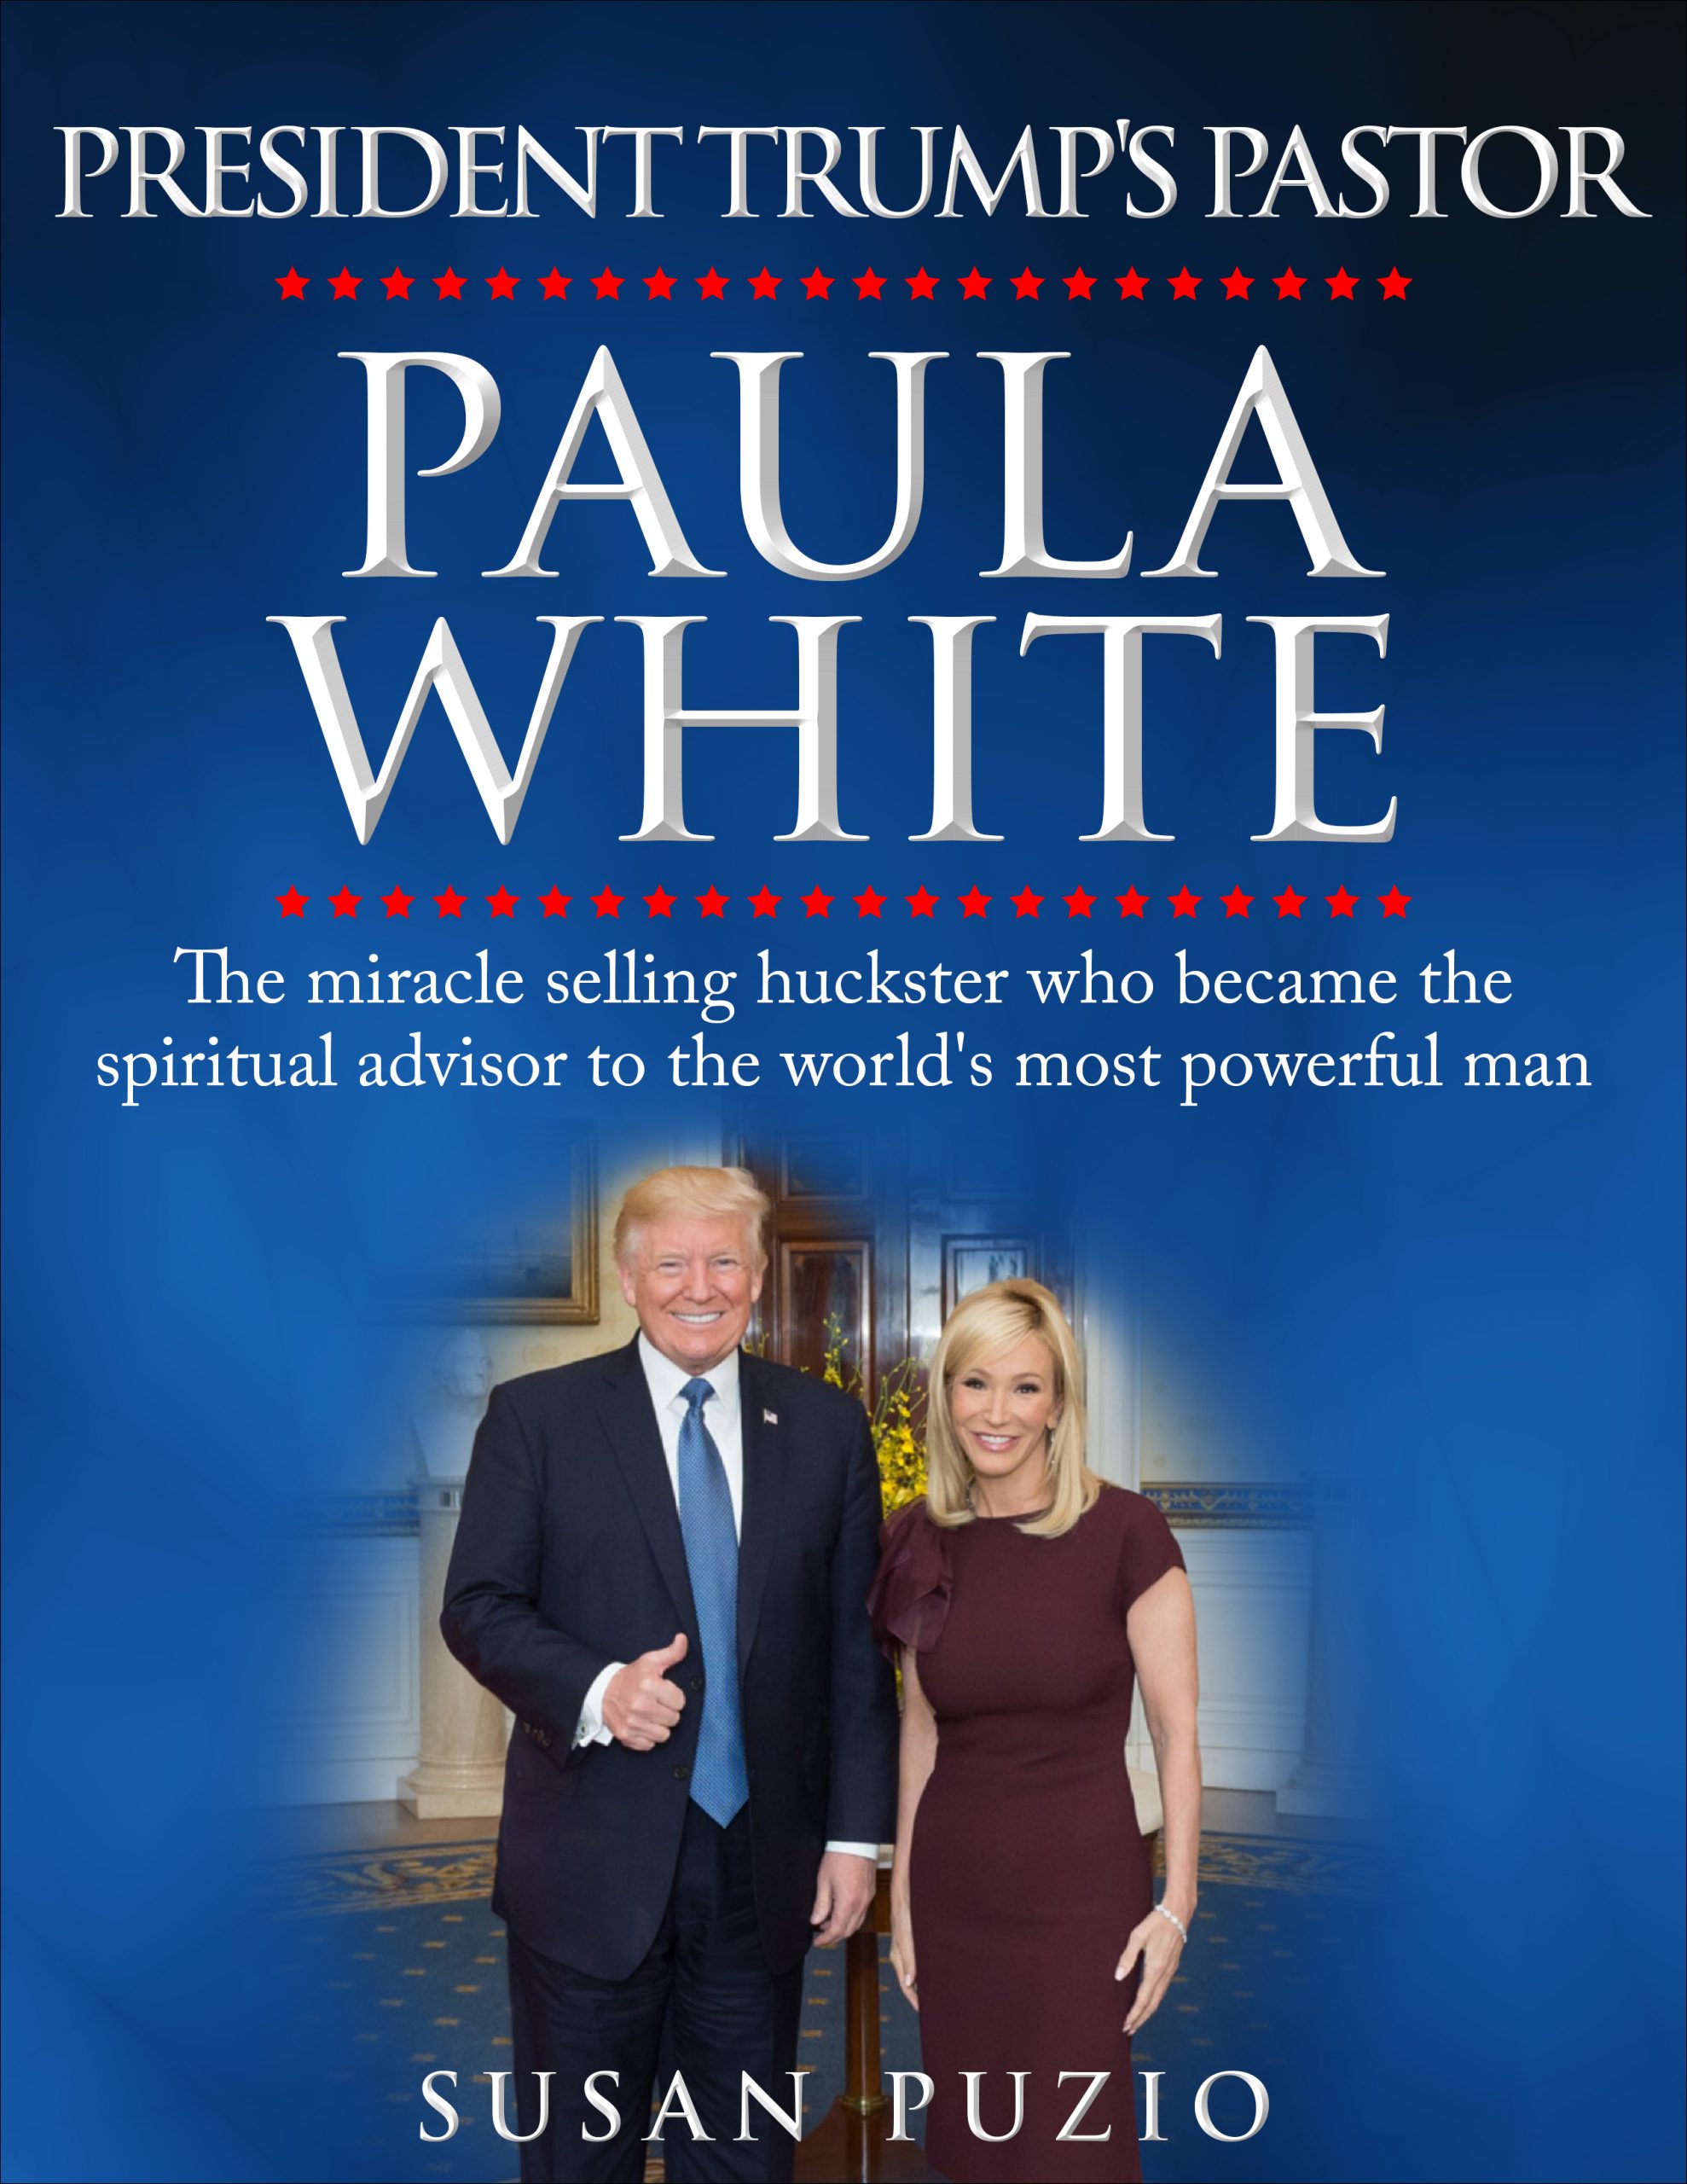 Read my book about Paula White, Trump’s pastor free Kindle download until Nov 29th